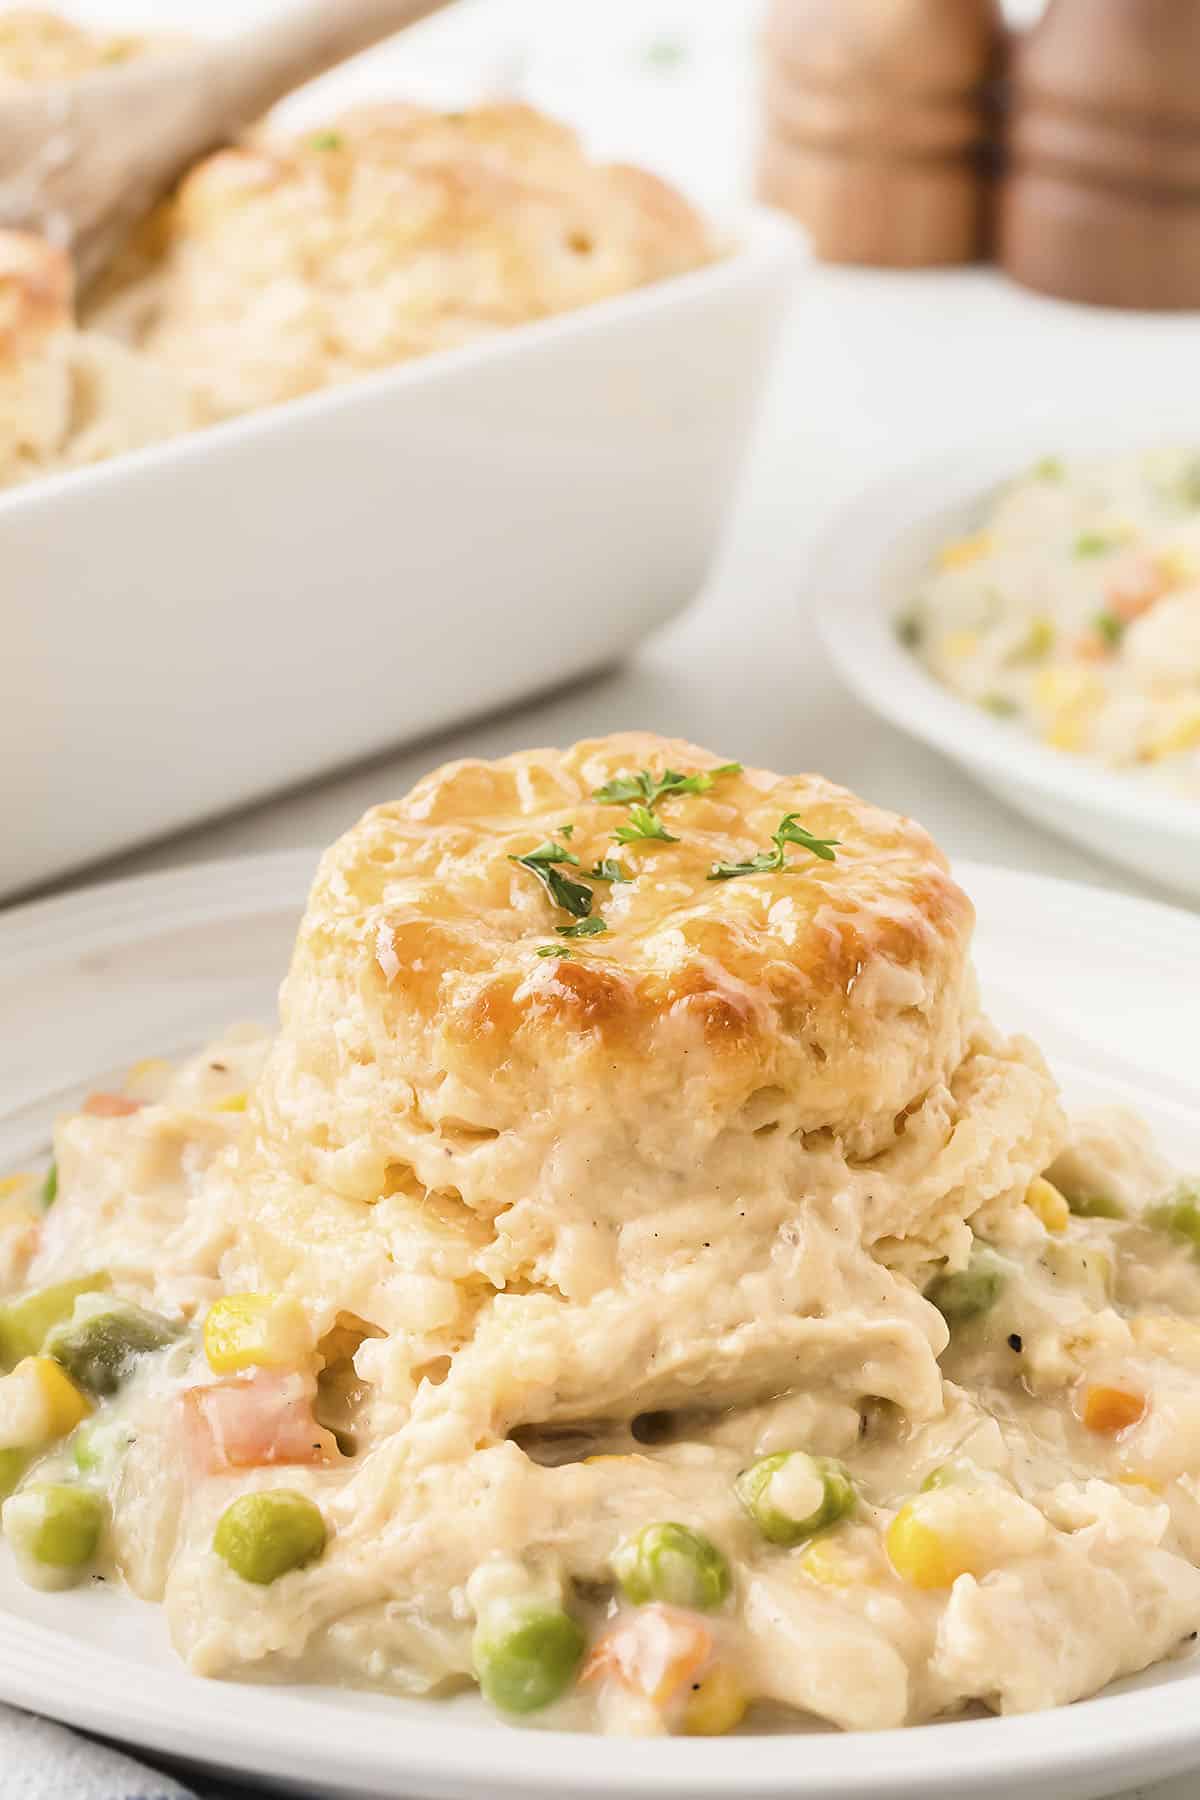 Plate full of chicken pot pie with biscuits.